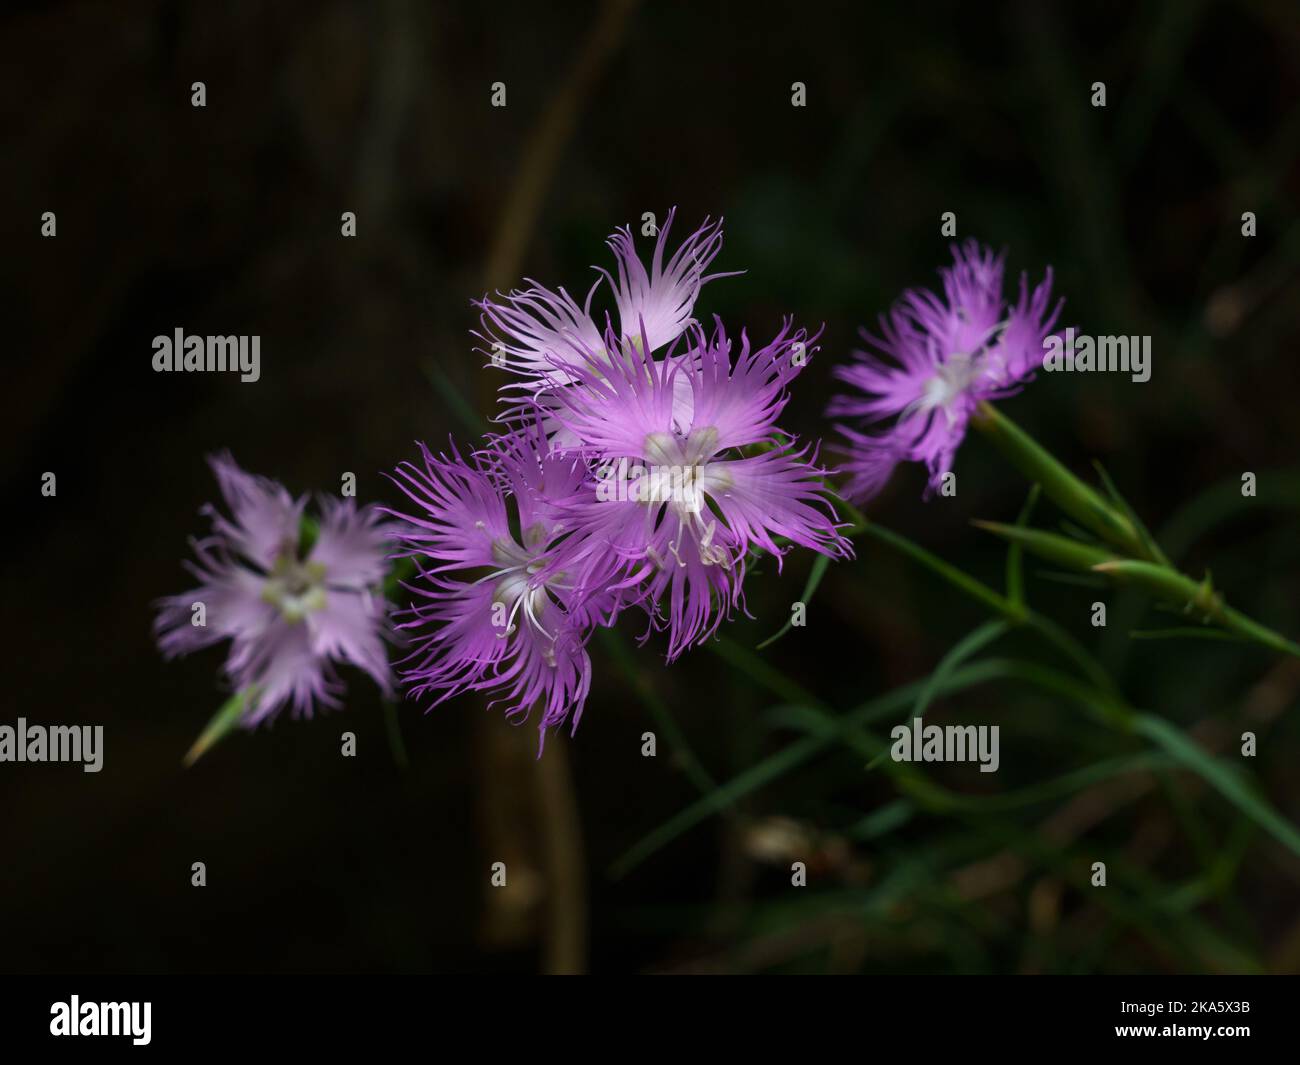 Closeup view of colorful bright purple pink and white dianthus monspessulanus or hyssopifolius aka fringed pink flowers on dark natural background Stock Photo